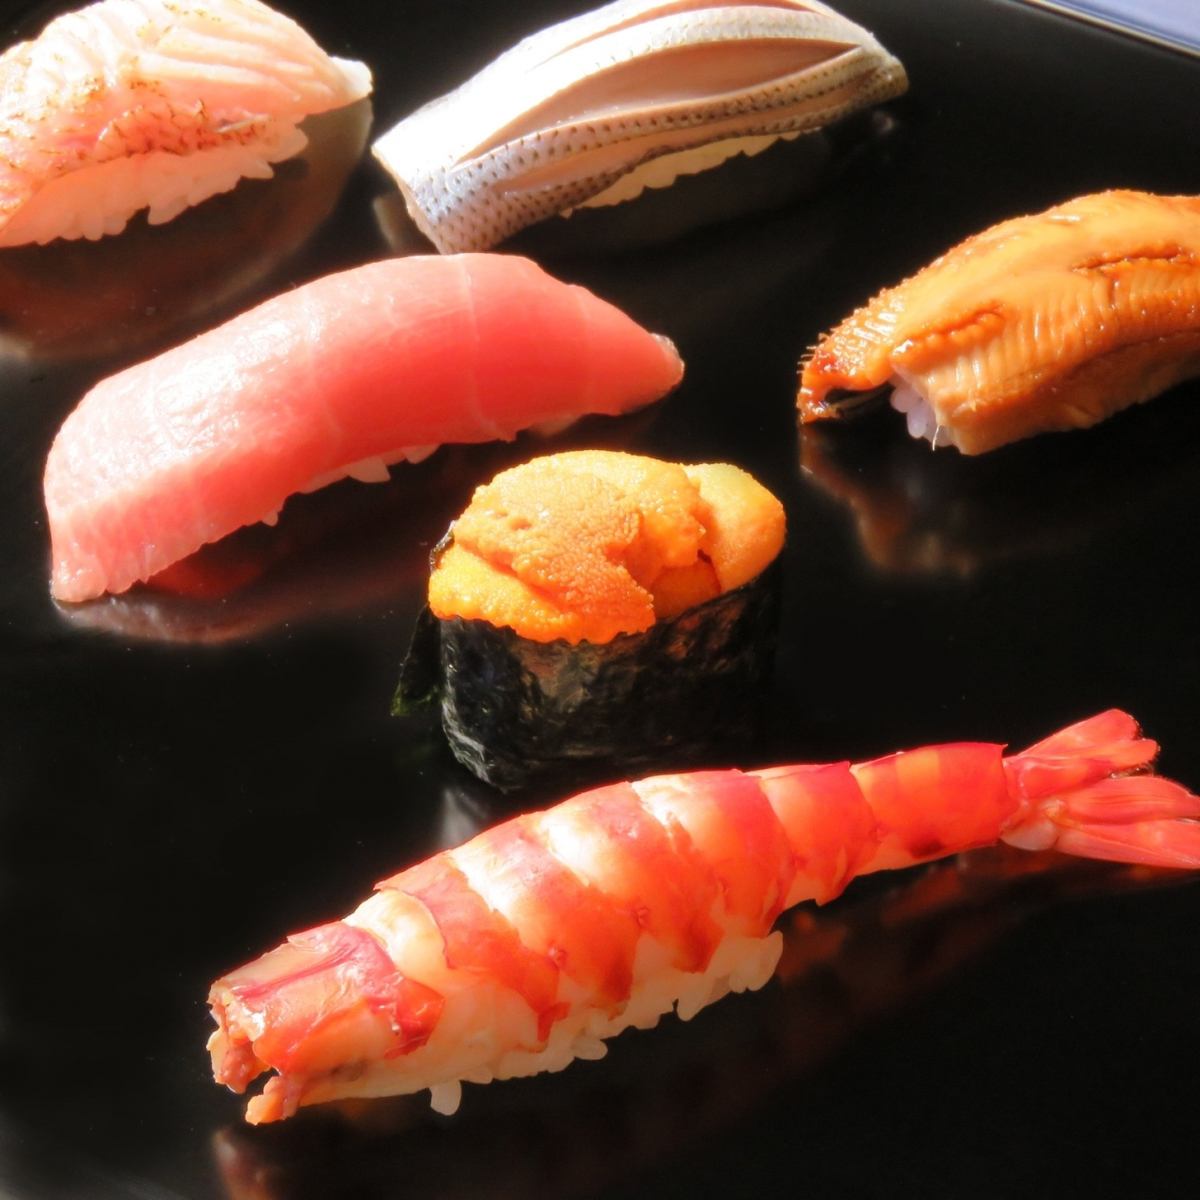 Exquisite sushi in front of Sanriku where you can taste the different seasons of Iwate, Kaiseki dishes from seasons to seasons ...